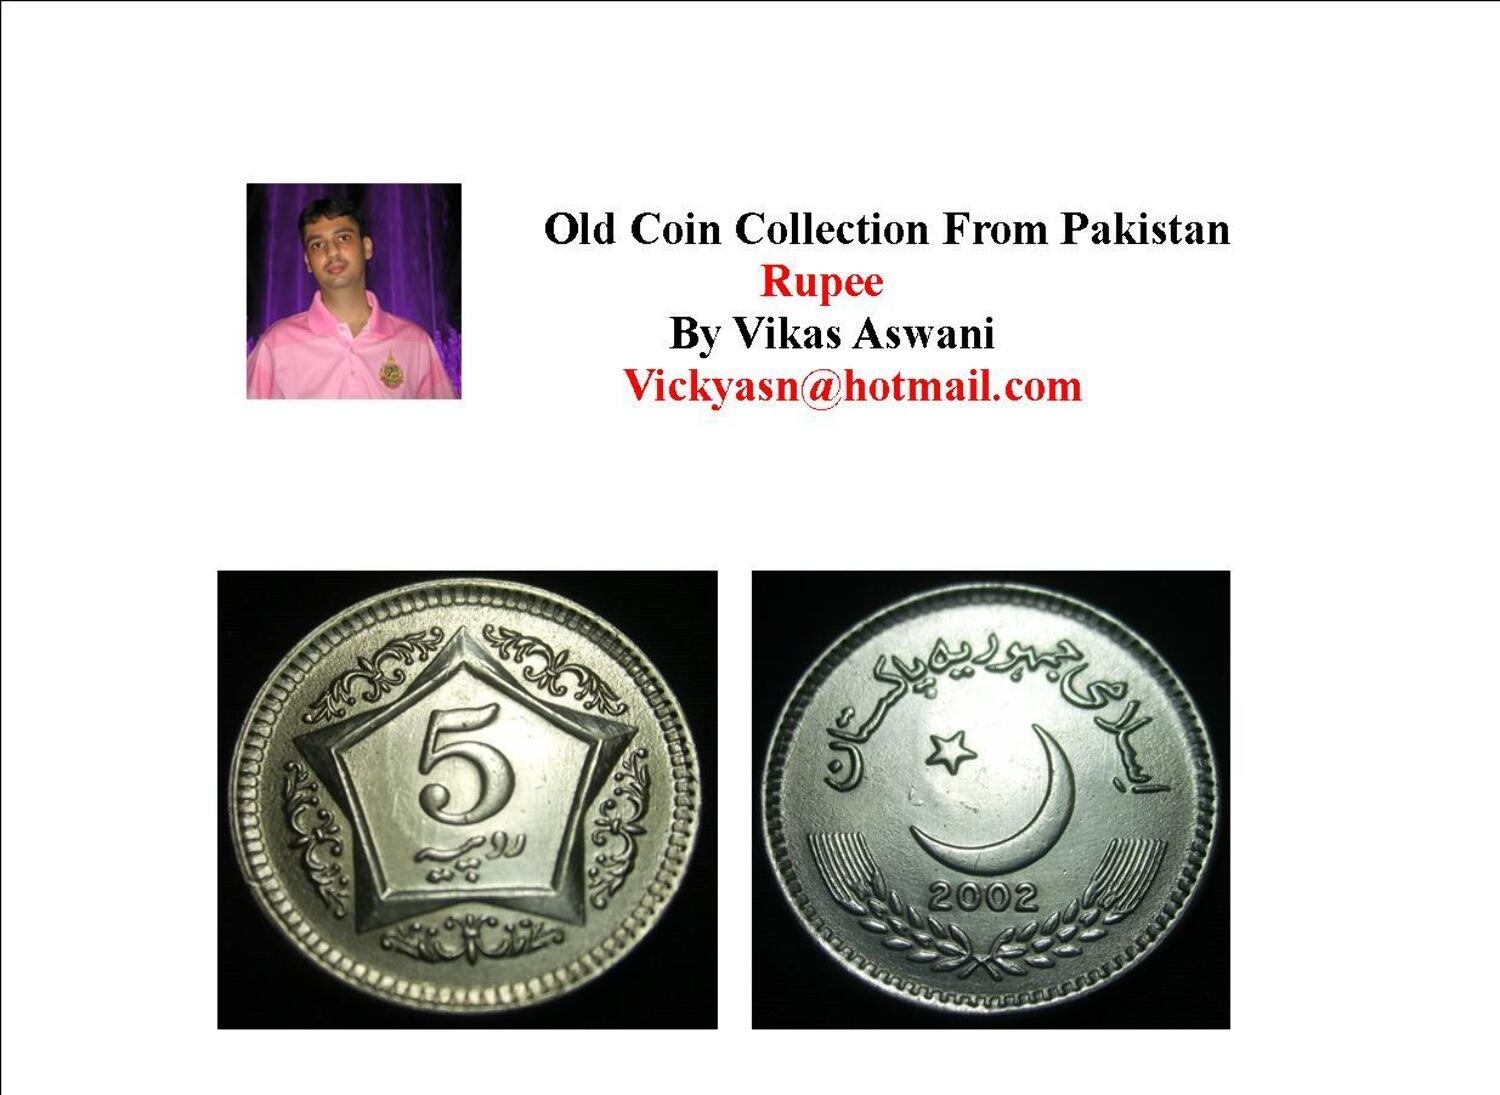 Pakistan Coin Rupee Pg 1 : my currency collection photo 36 from album